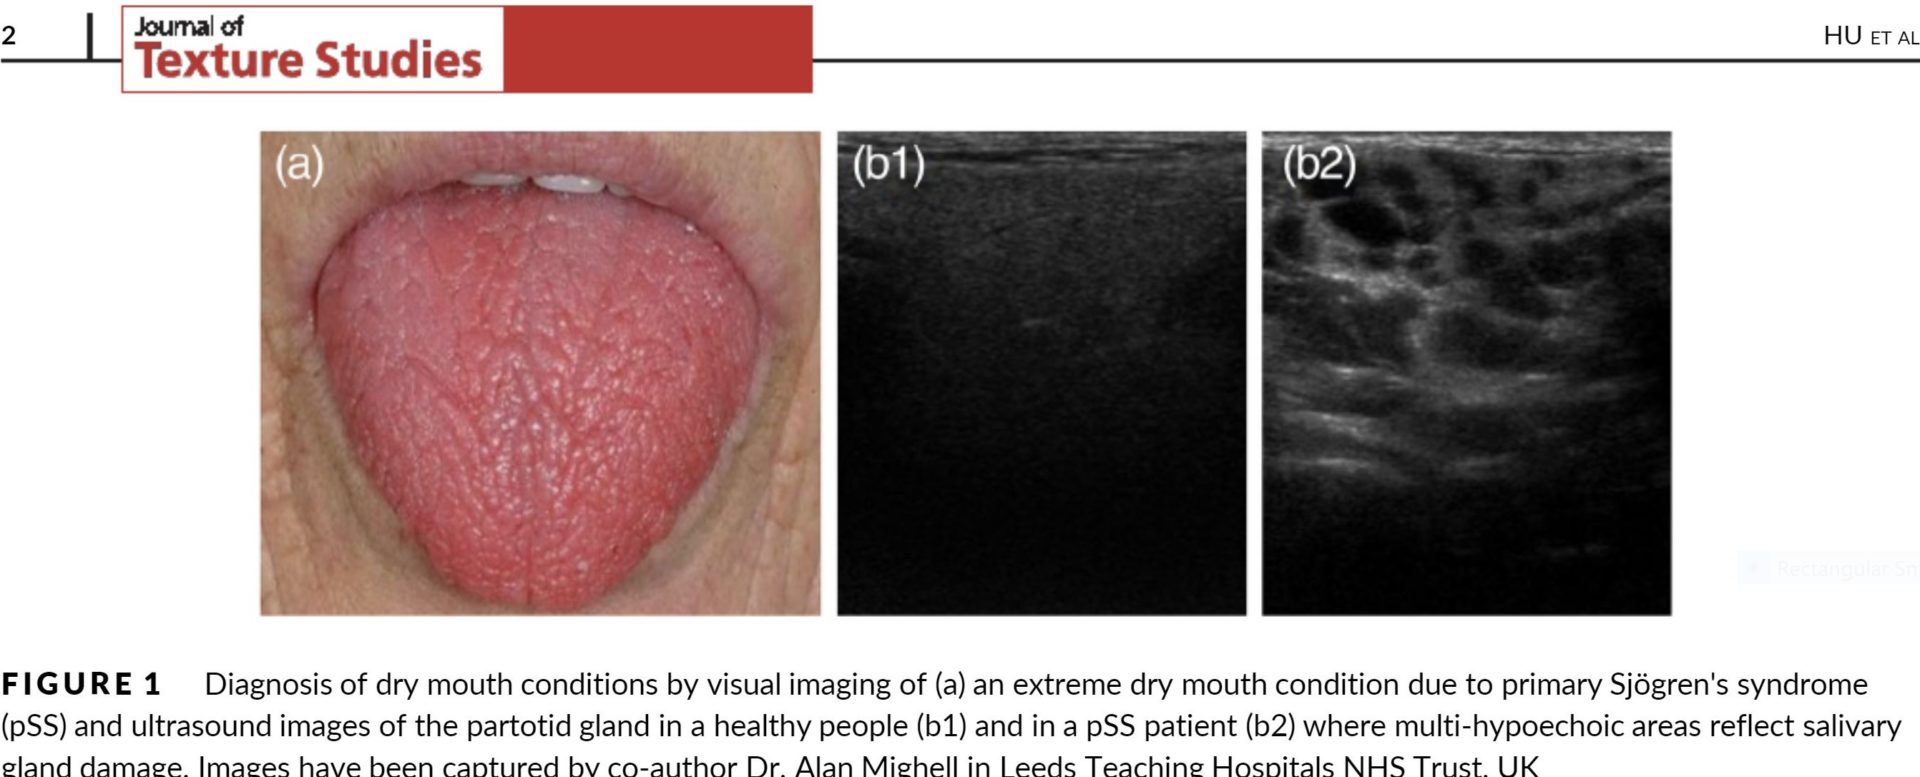 New review article on dry mouth published in Journal of Texture Studies